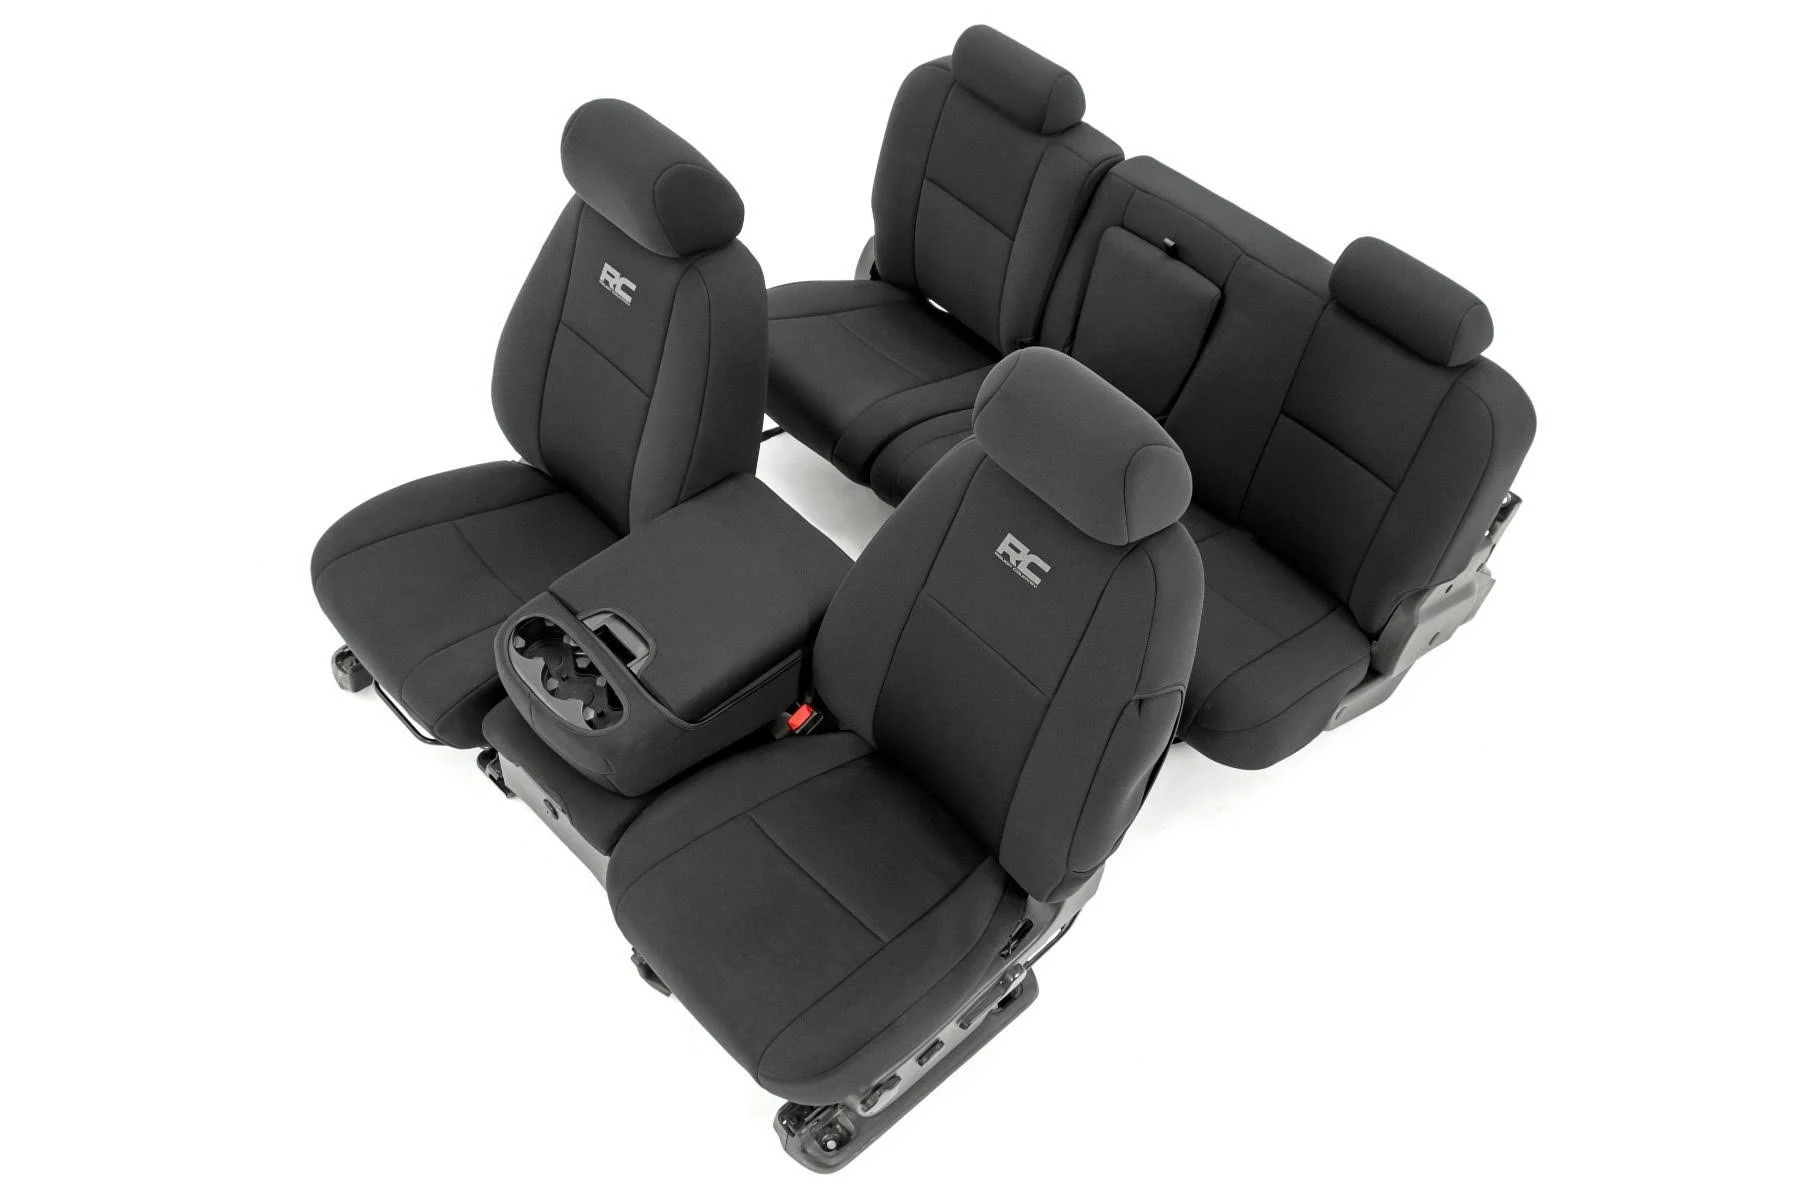 Rough Country 91033 GMC Sierra GM Neoprene Front and Rear Seat Covers Black